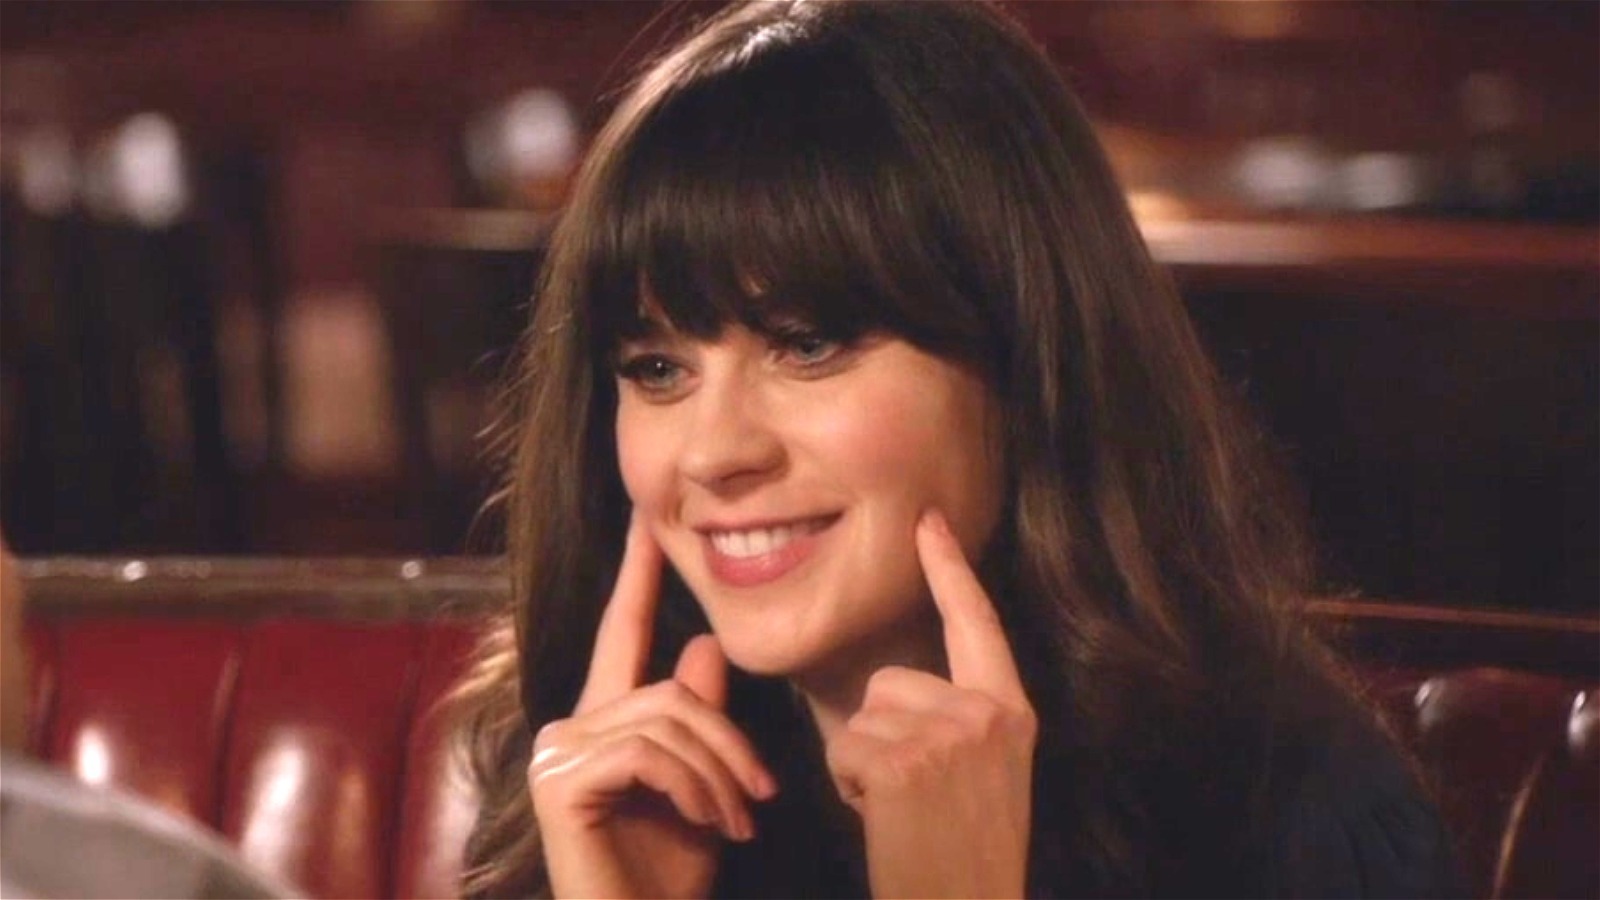 Cast jess whos girl that New Girl: